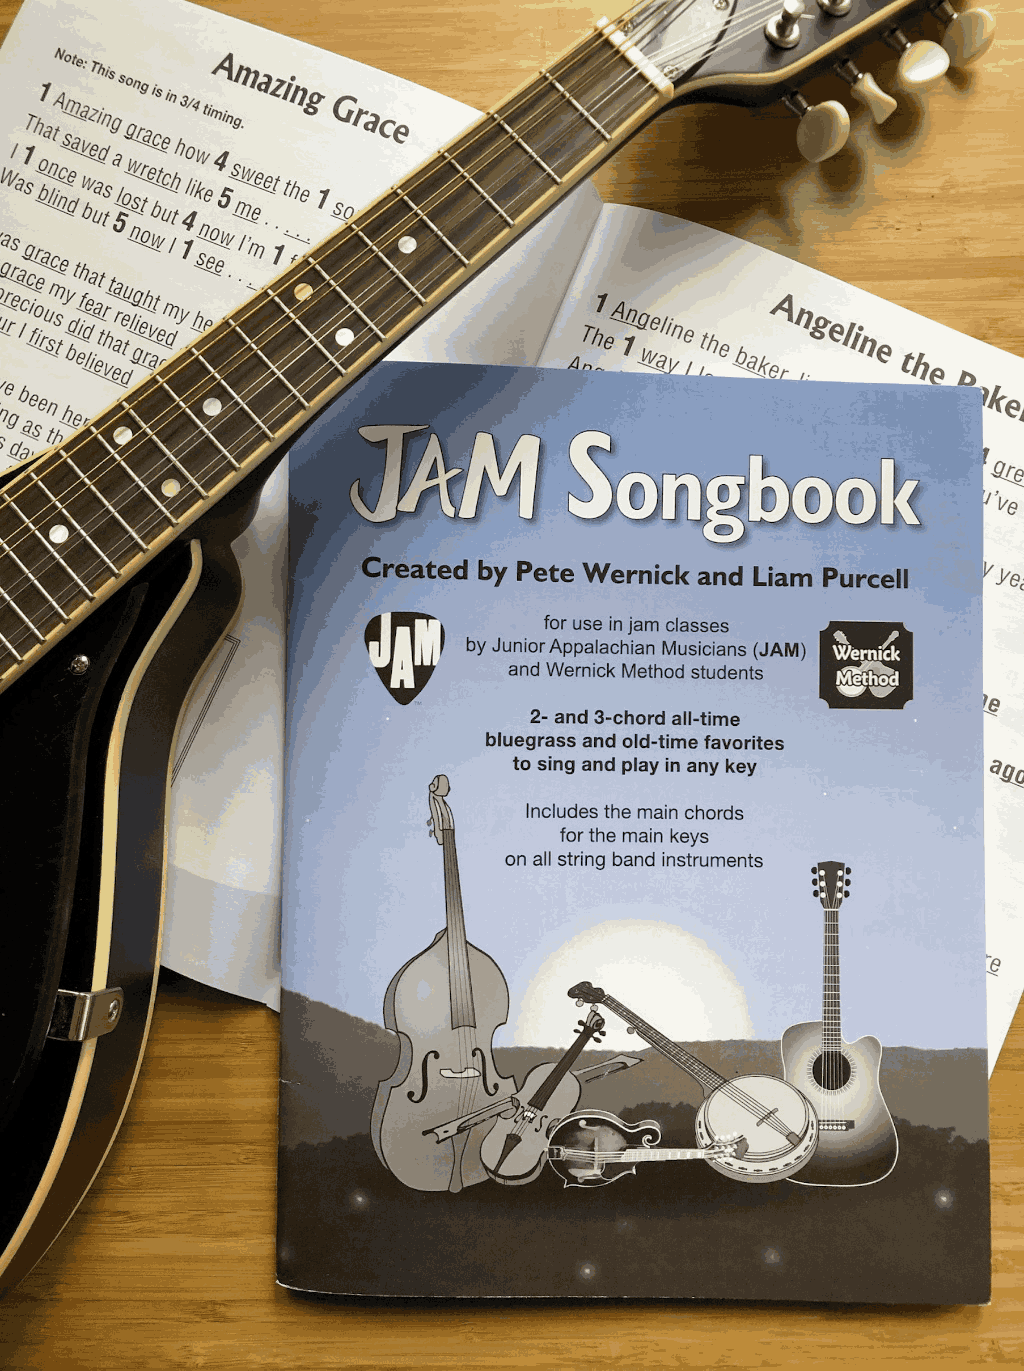 Jam Songbook, by Pete Wernick and Liam Purcell